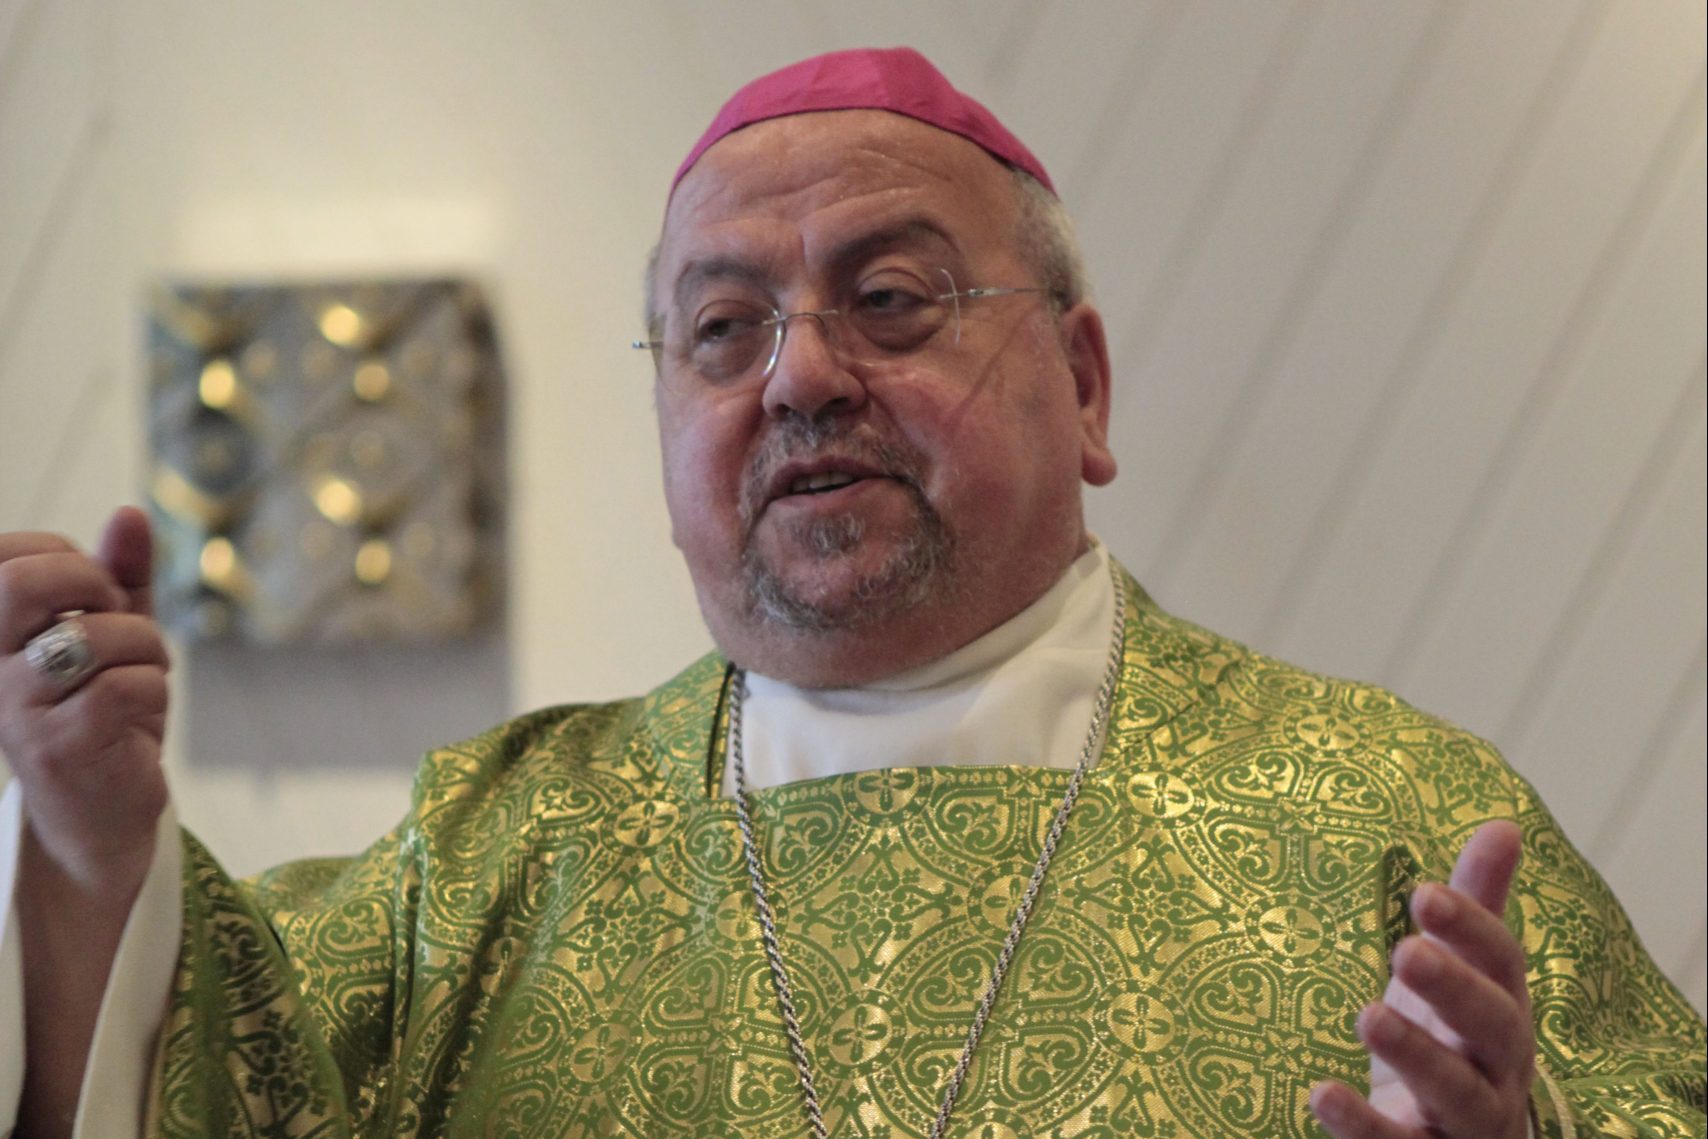 With image of Archbishop Samir Nassar (© Aid to the Church in Need)